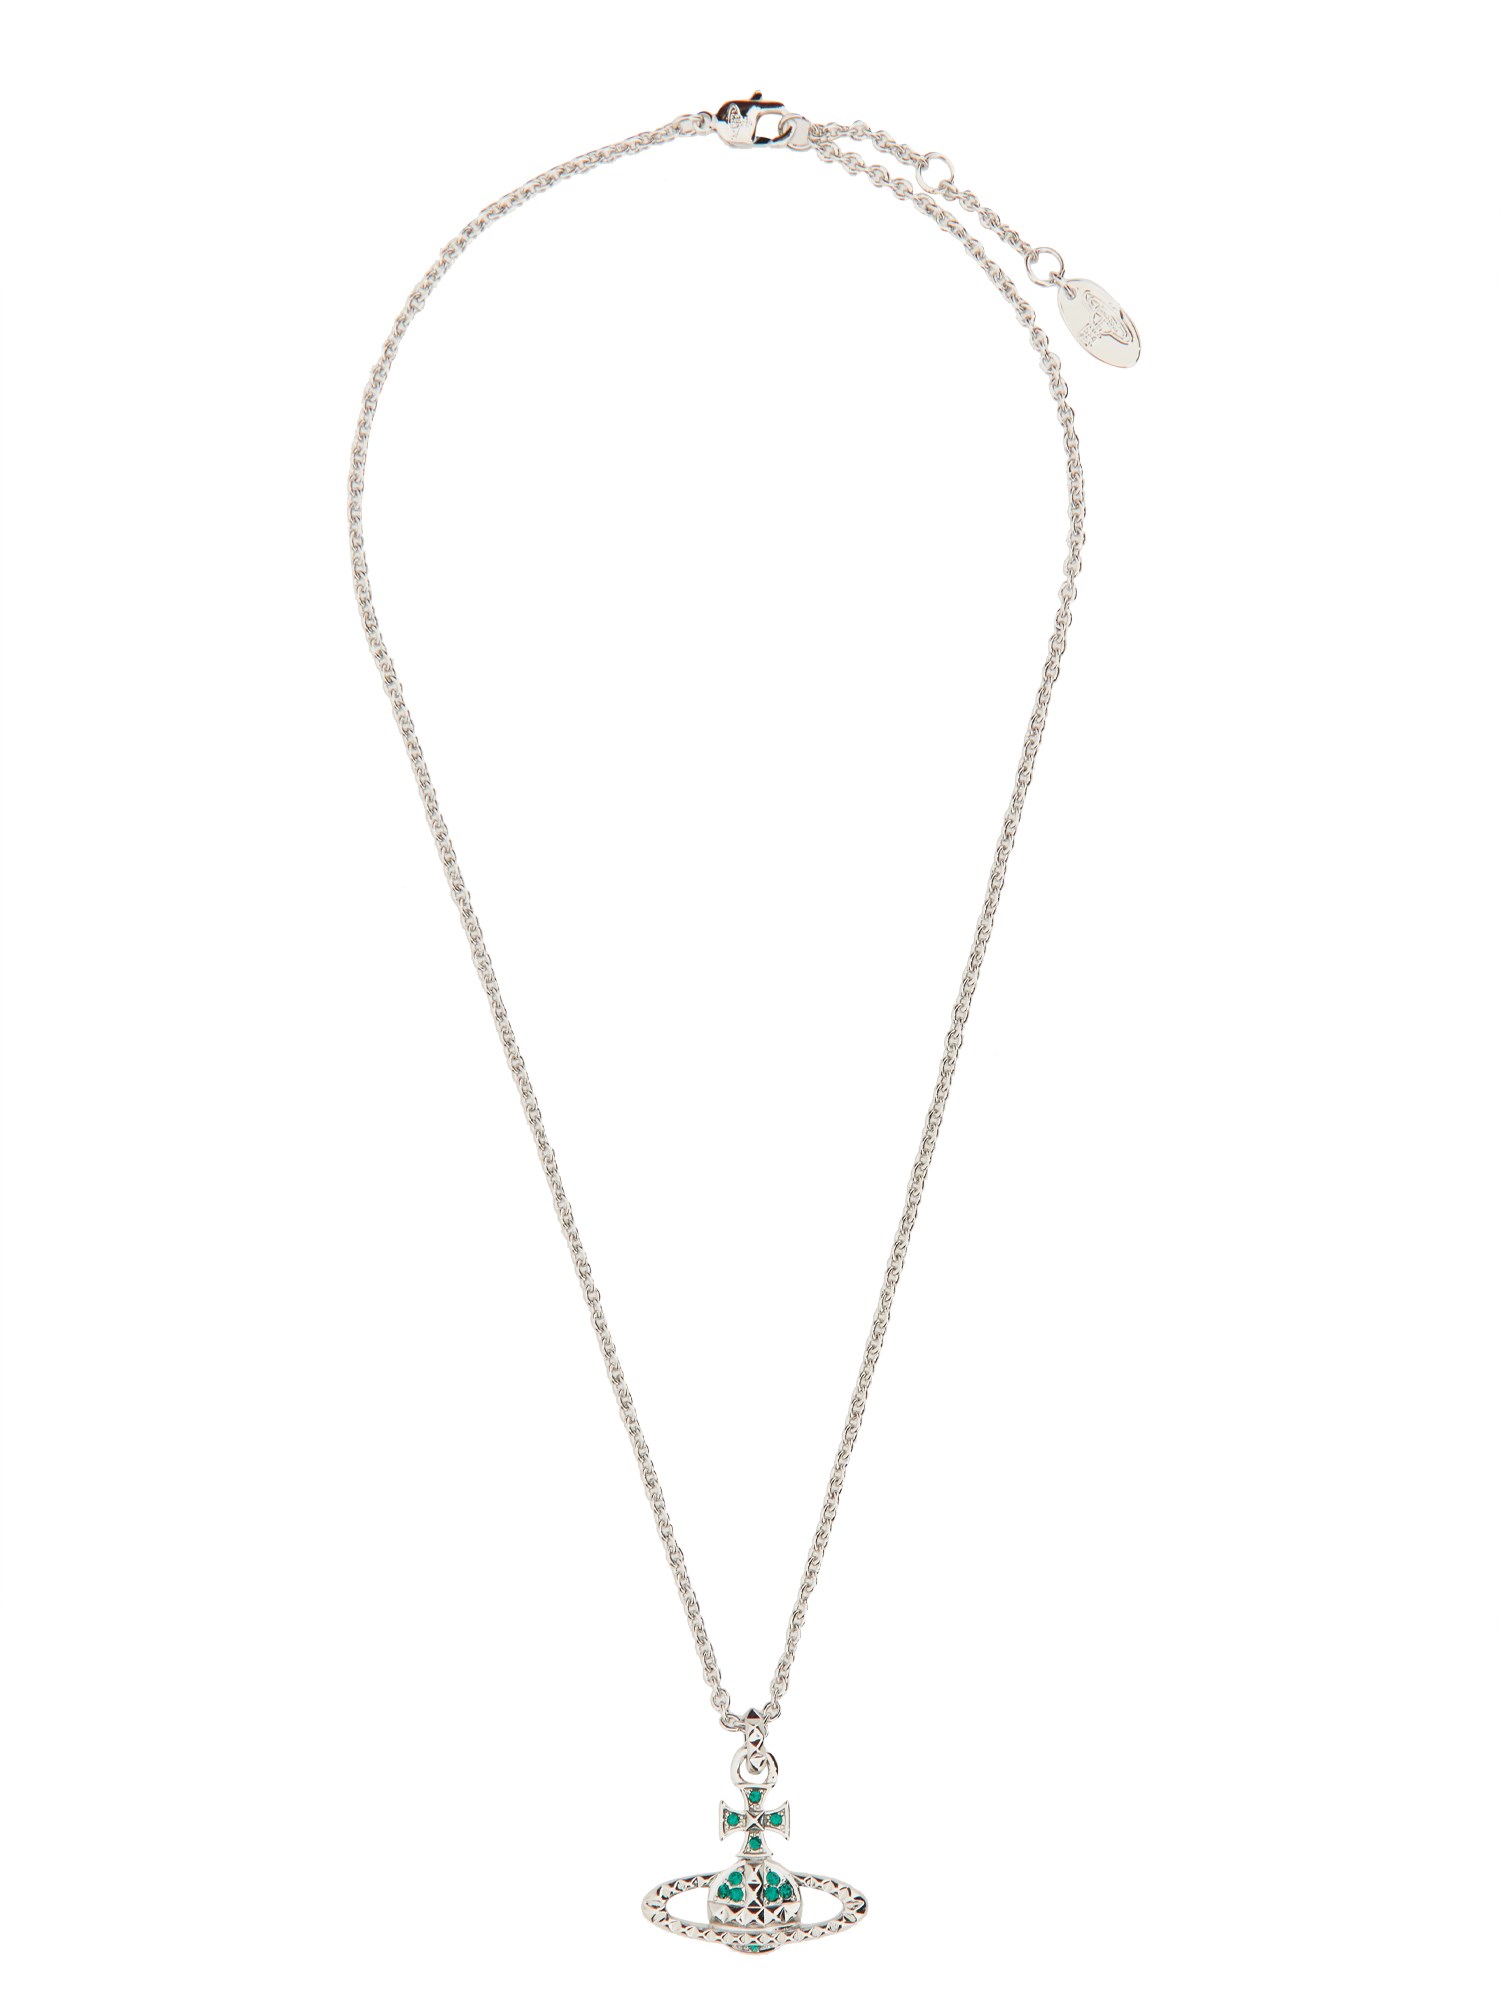 Vivienne Westwood Mayfair Bas Relief Necklace In Silver | ModeSens